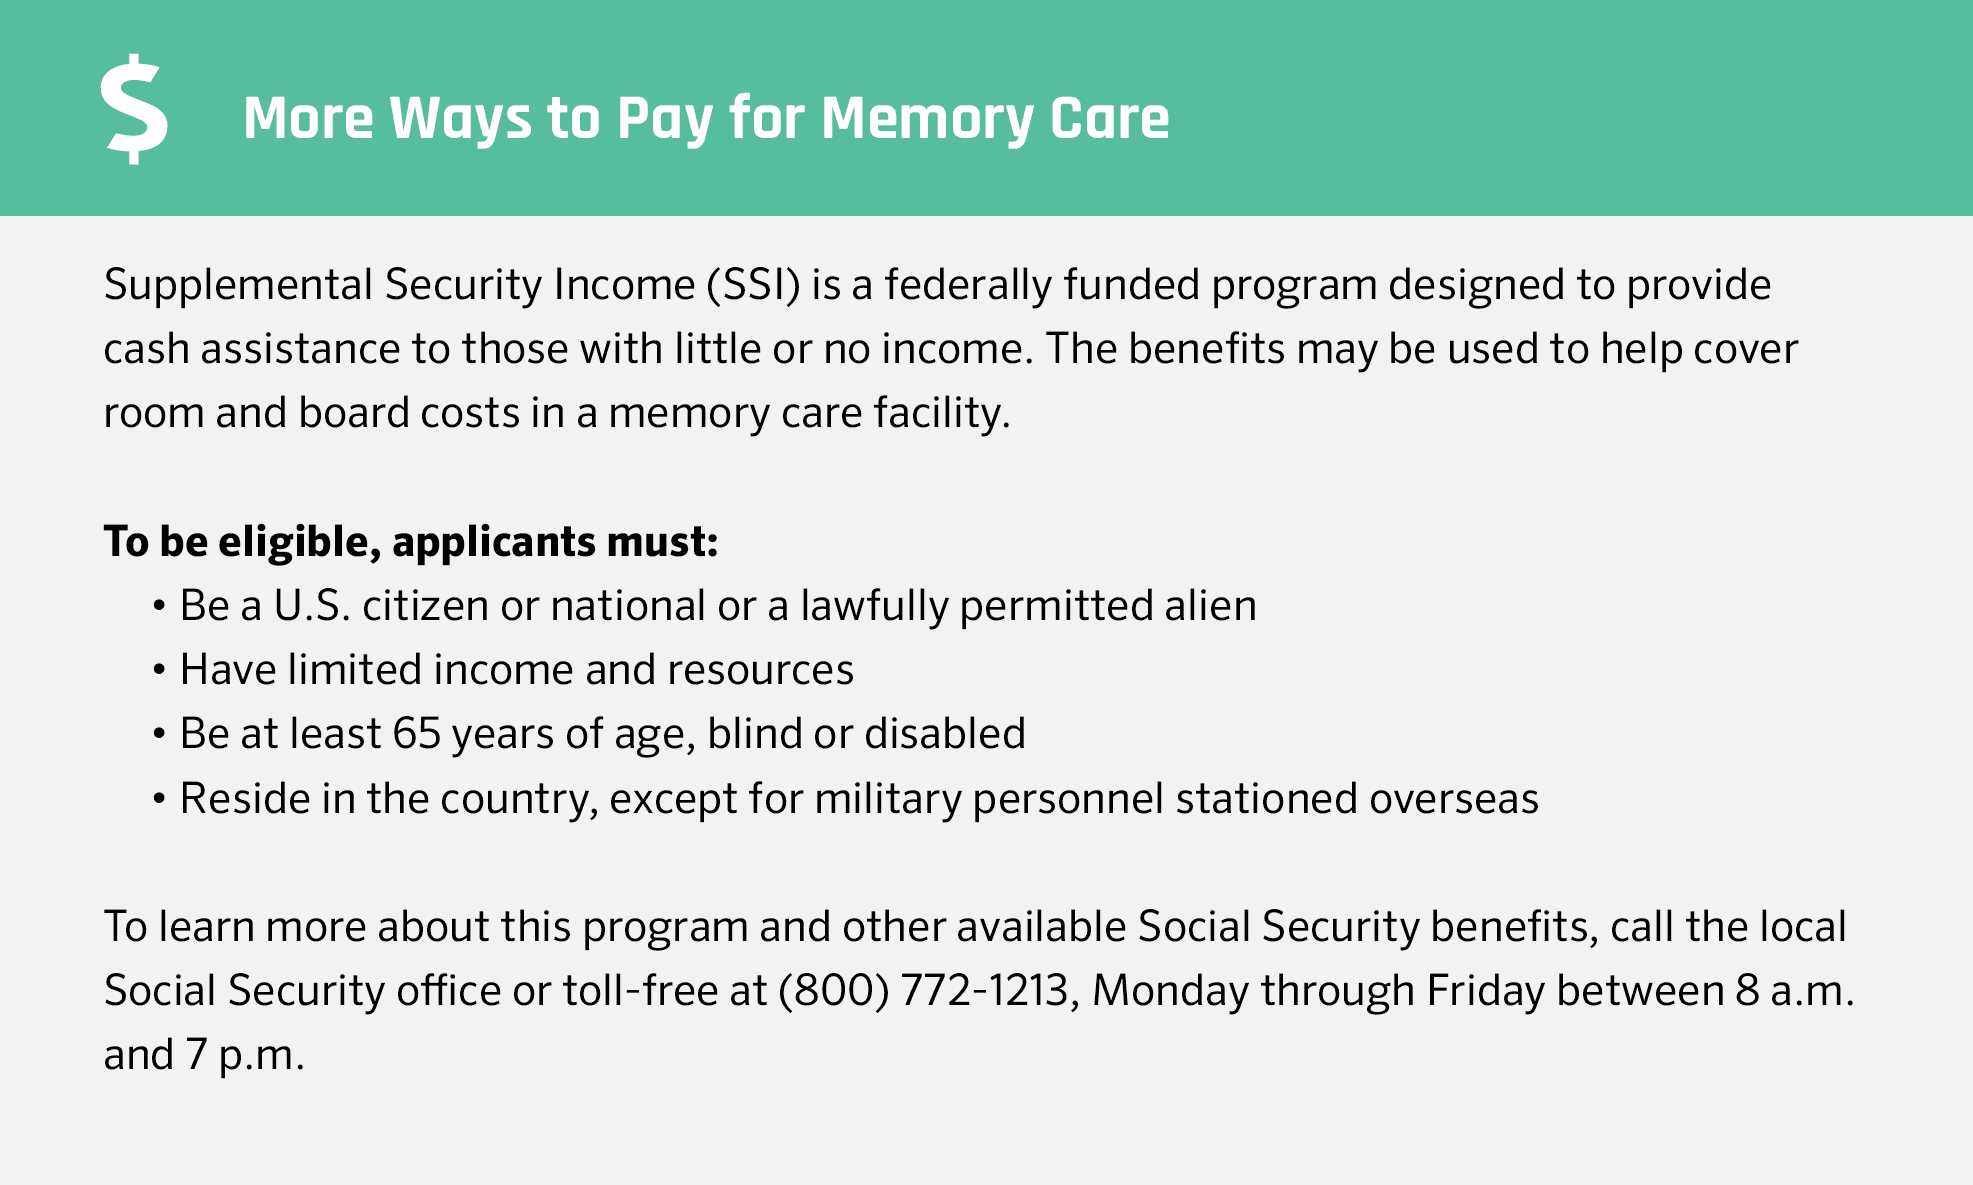 Financial Assistance for Memory Care in Georgia